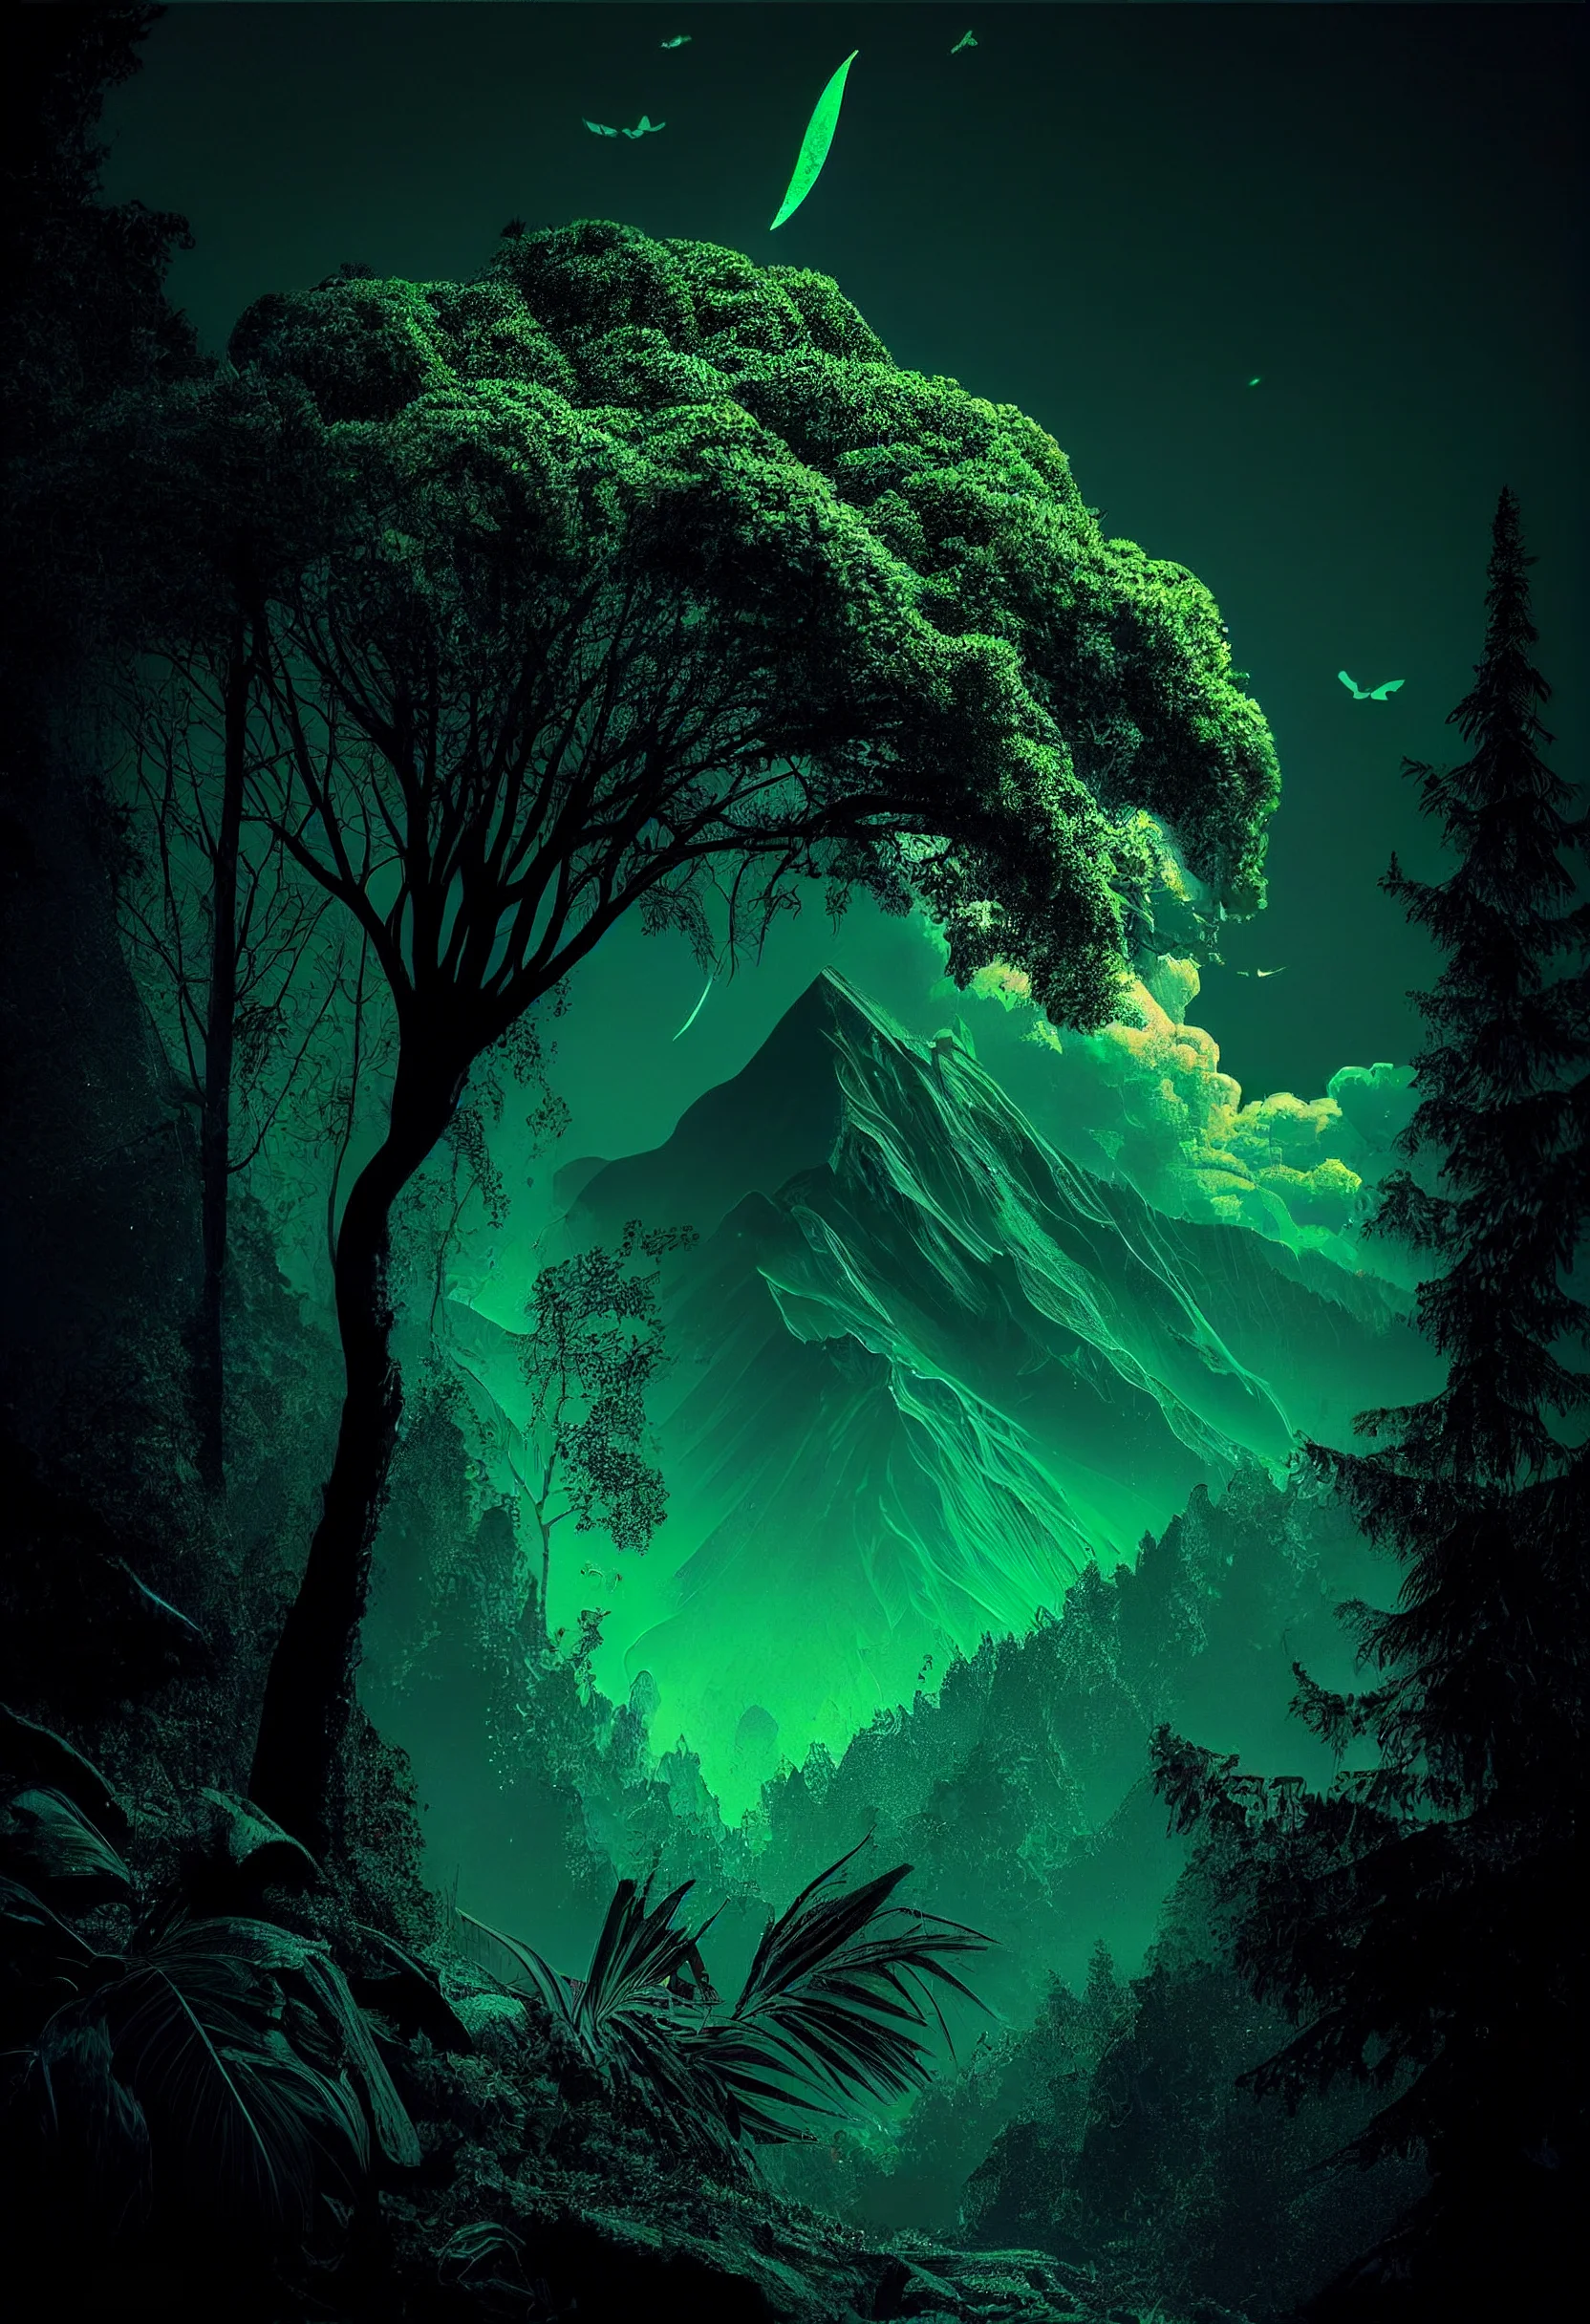 A painting of trees and mountains in the dark - Soft green